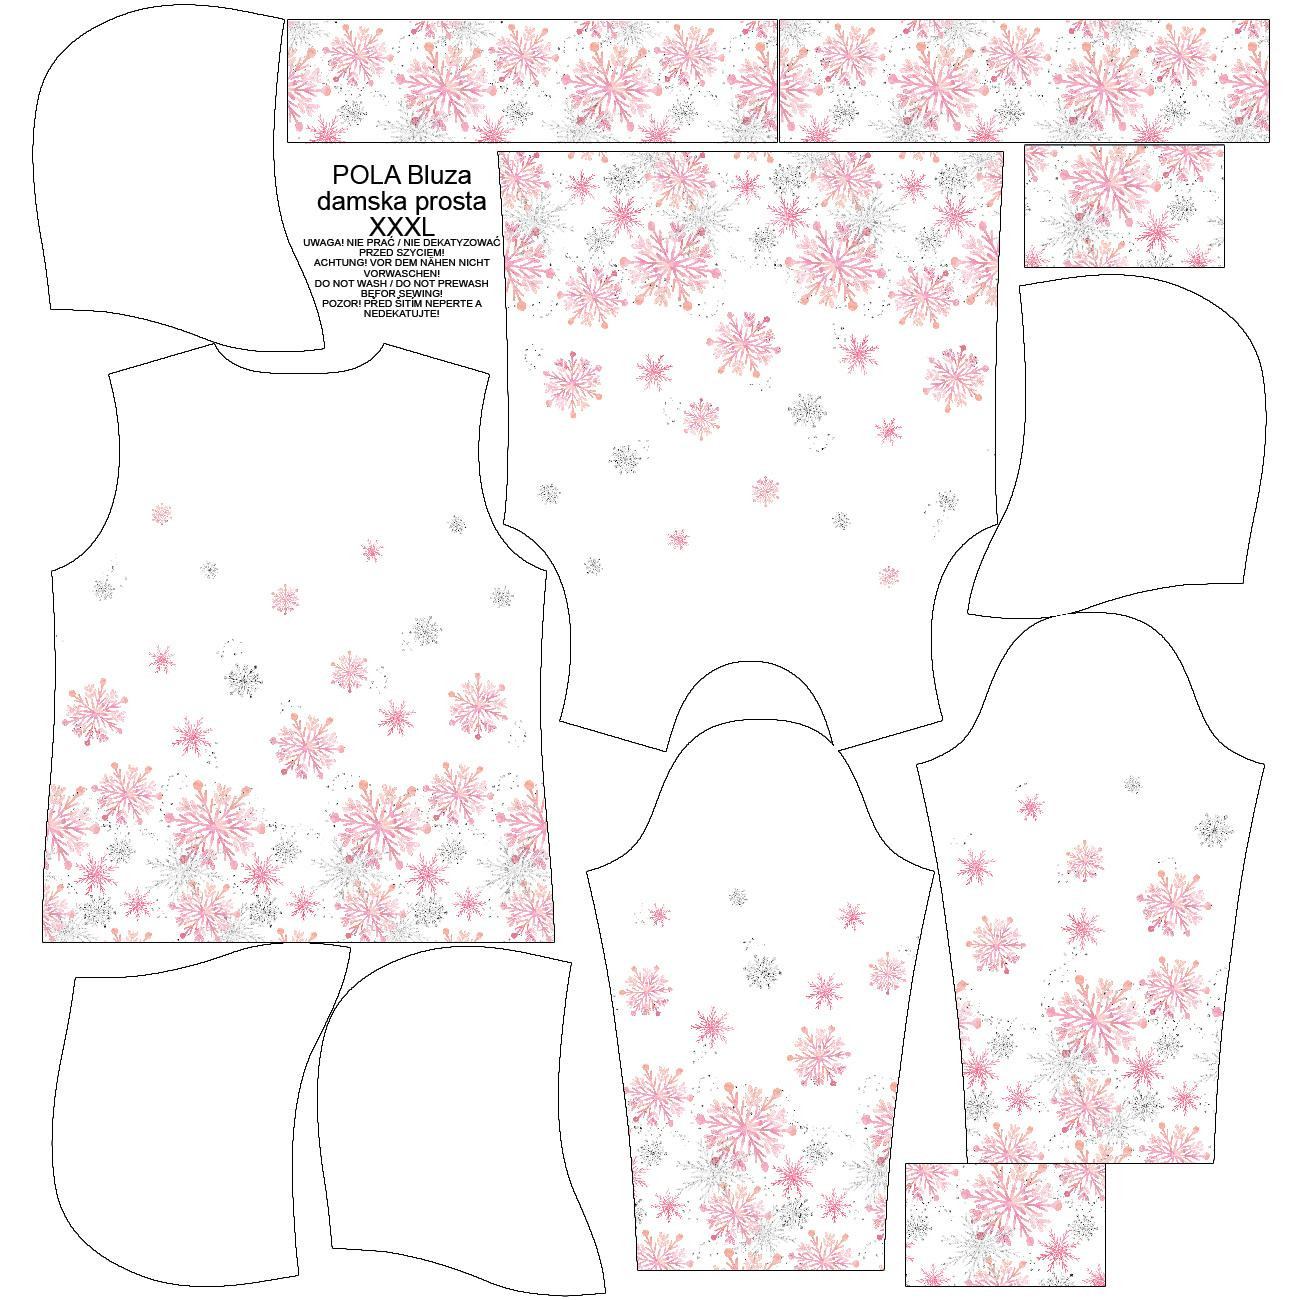 CLASSIC WOMEN’S HOODIE (POLA) - PINK SNOWFLAKES pat. 2 - looped knit fabric 